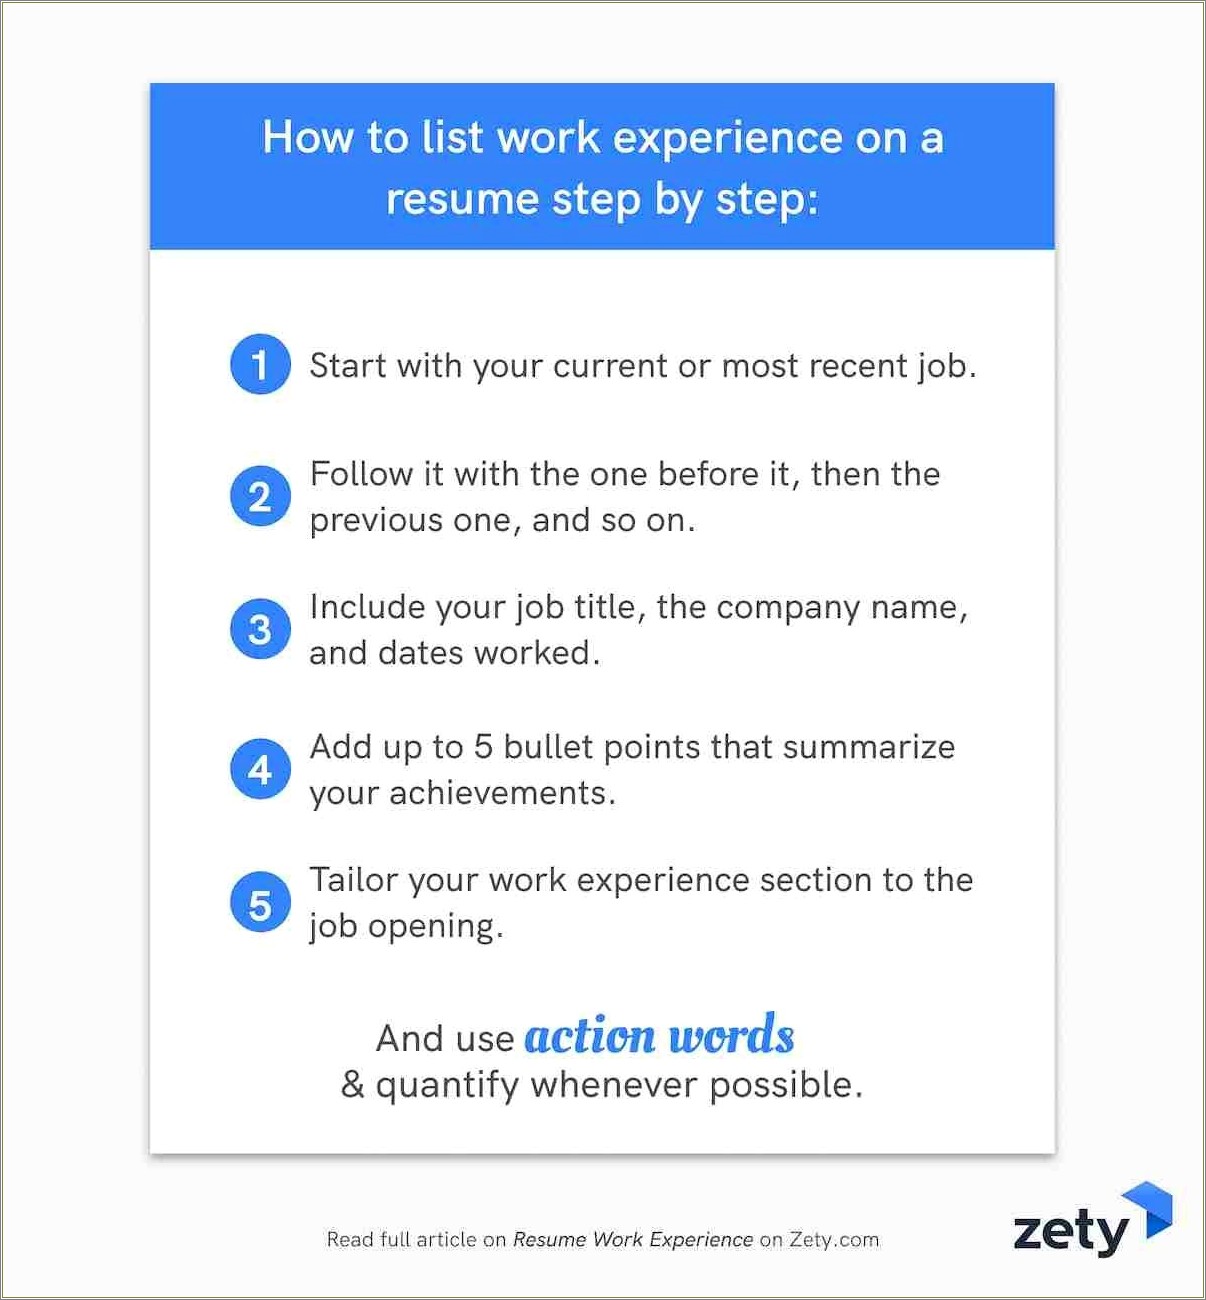 Better Job Titles To Use On Resume